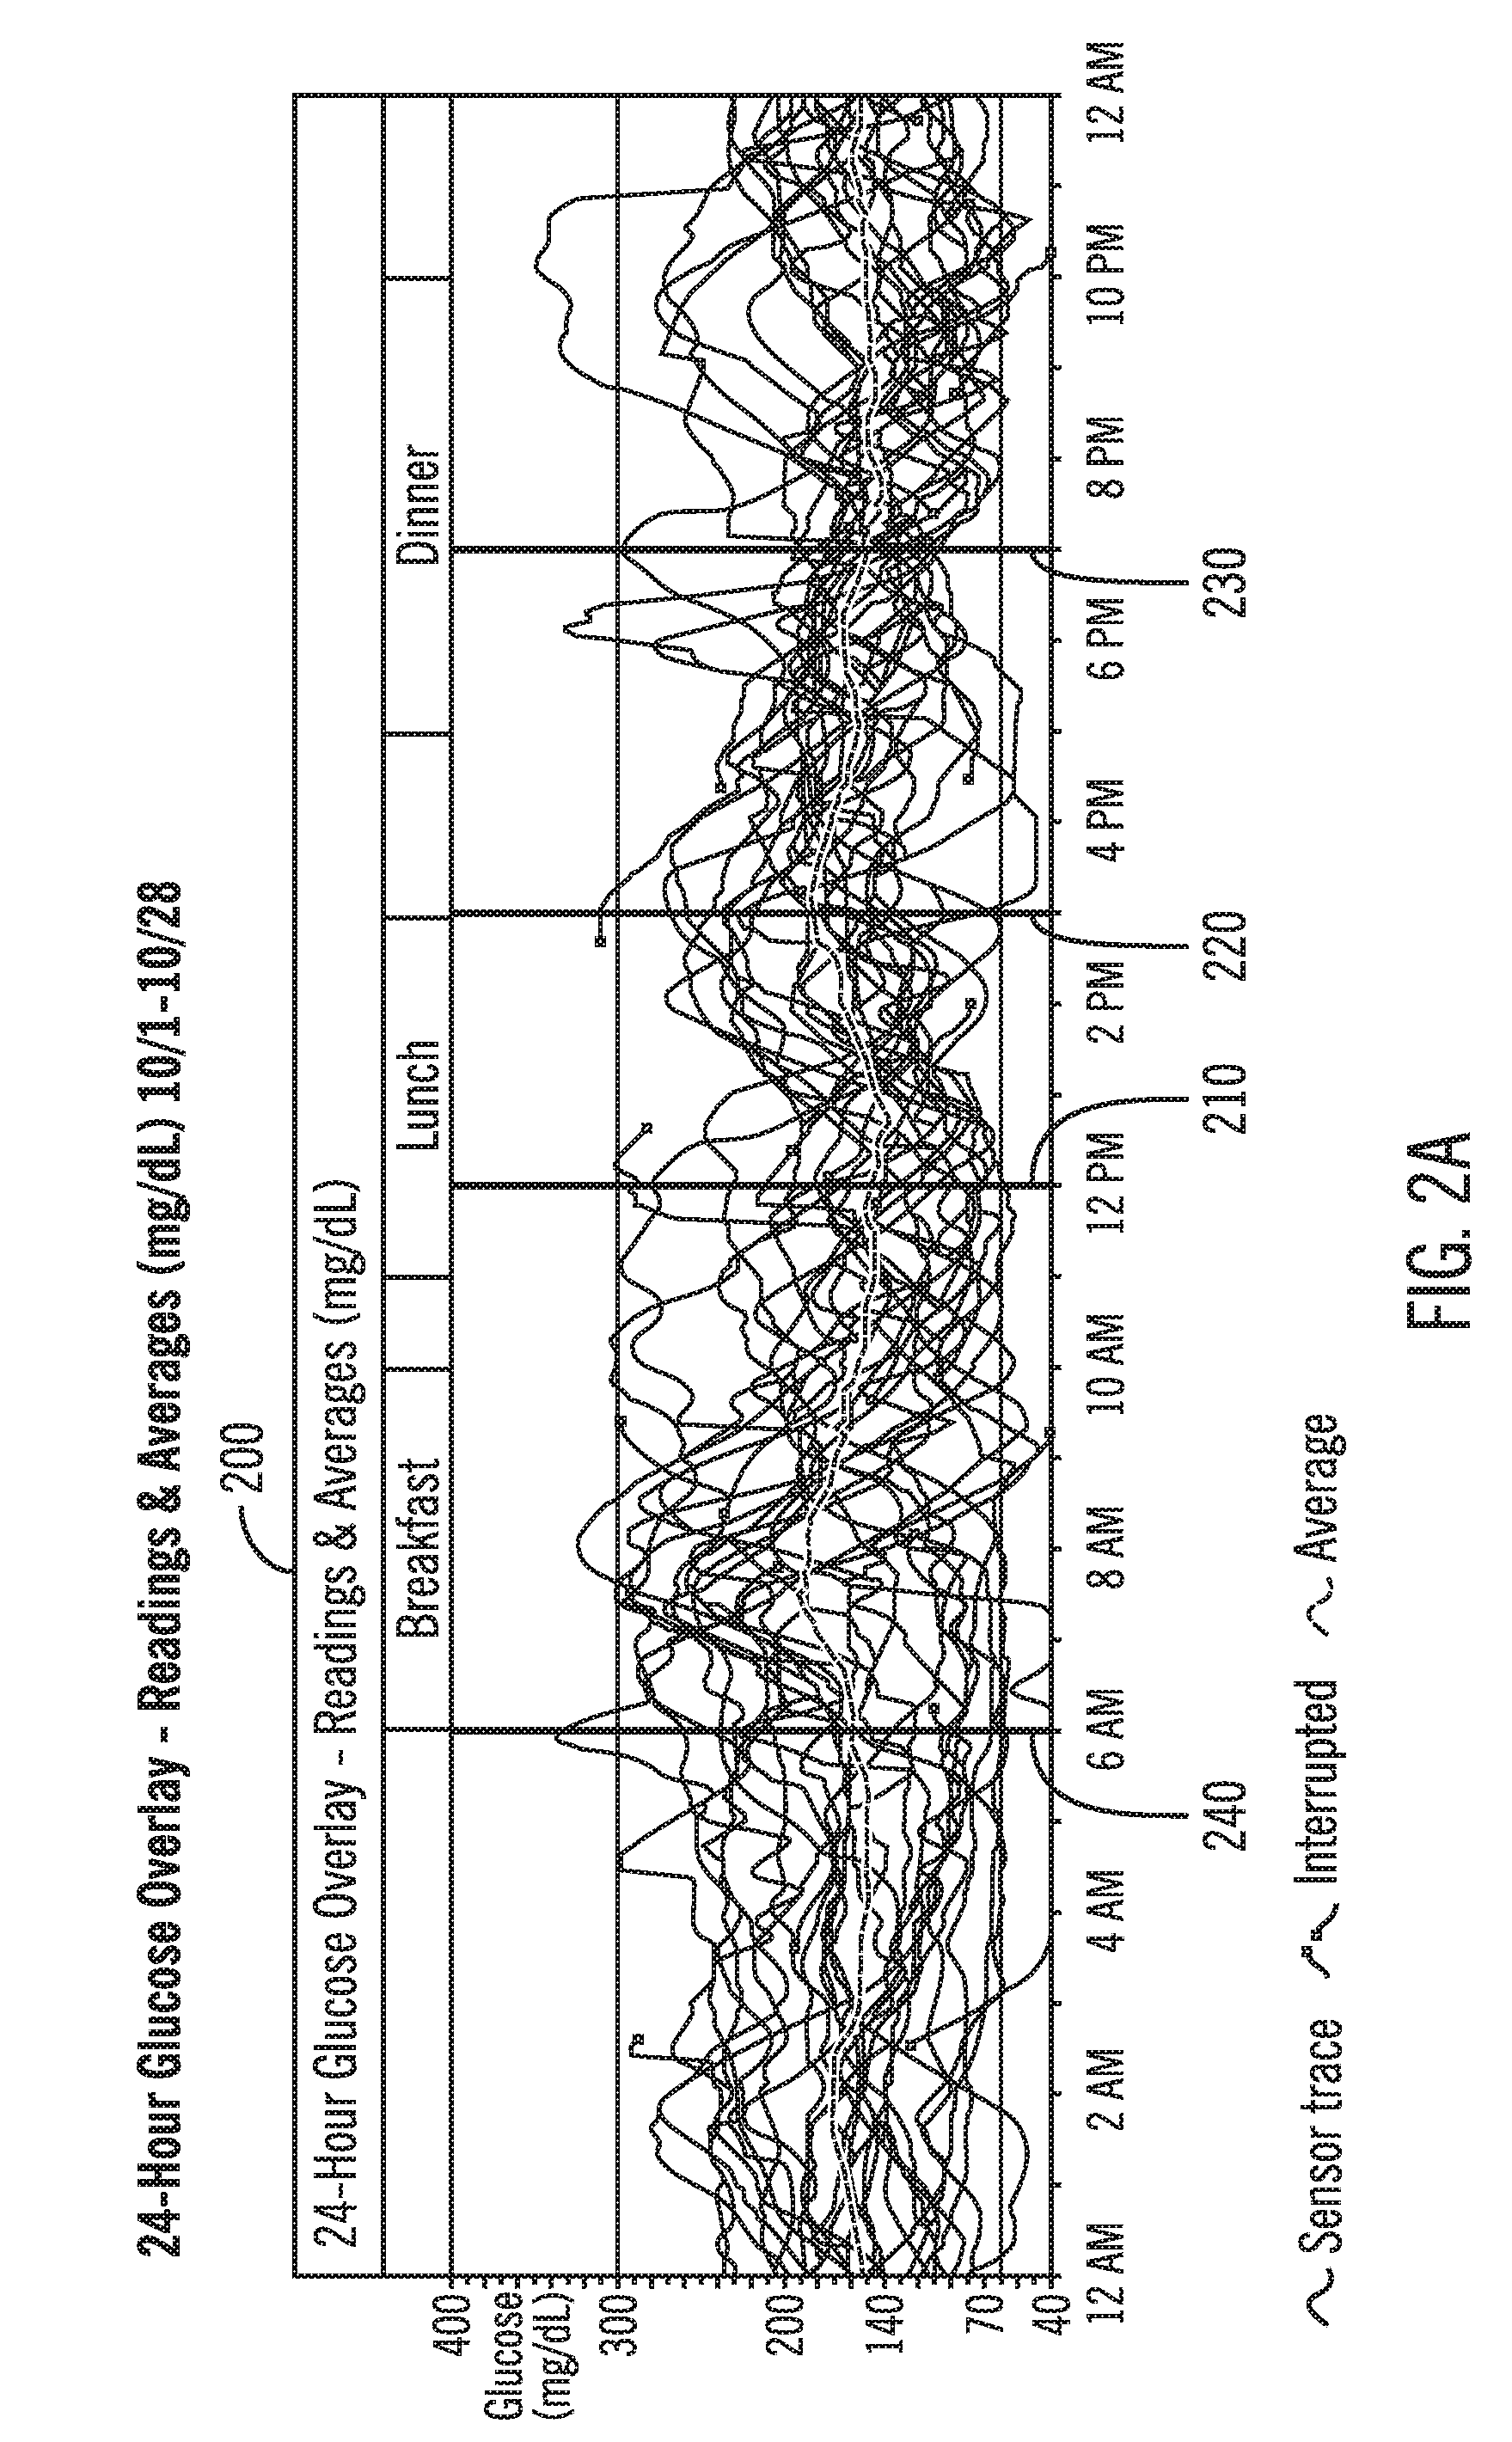 Systems and Methods for Providing Bolus Dosage Recommendations